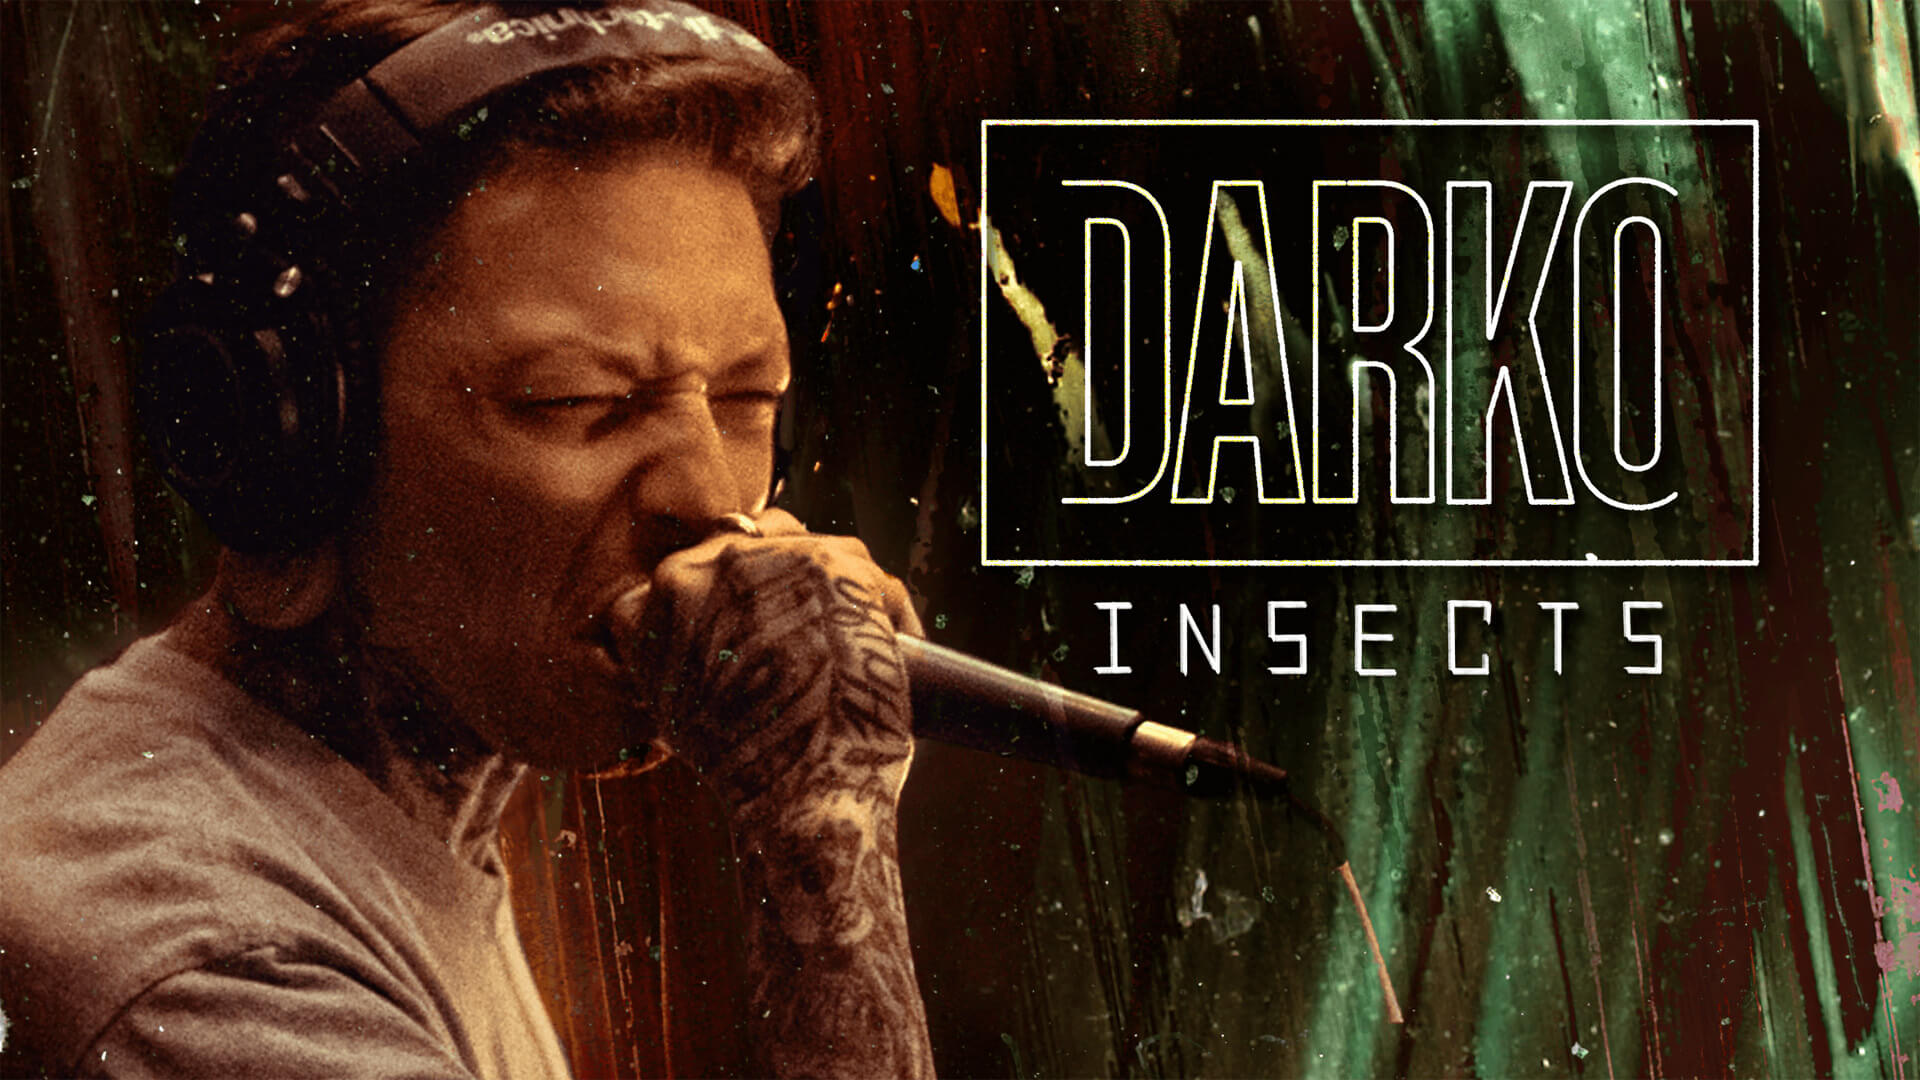 LIVE: WATCH DARKO PERFORM A LIVE IN-STUDIO PERFORMANCE OF “INSECTS”